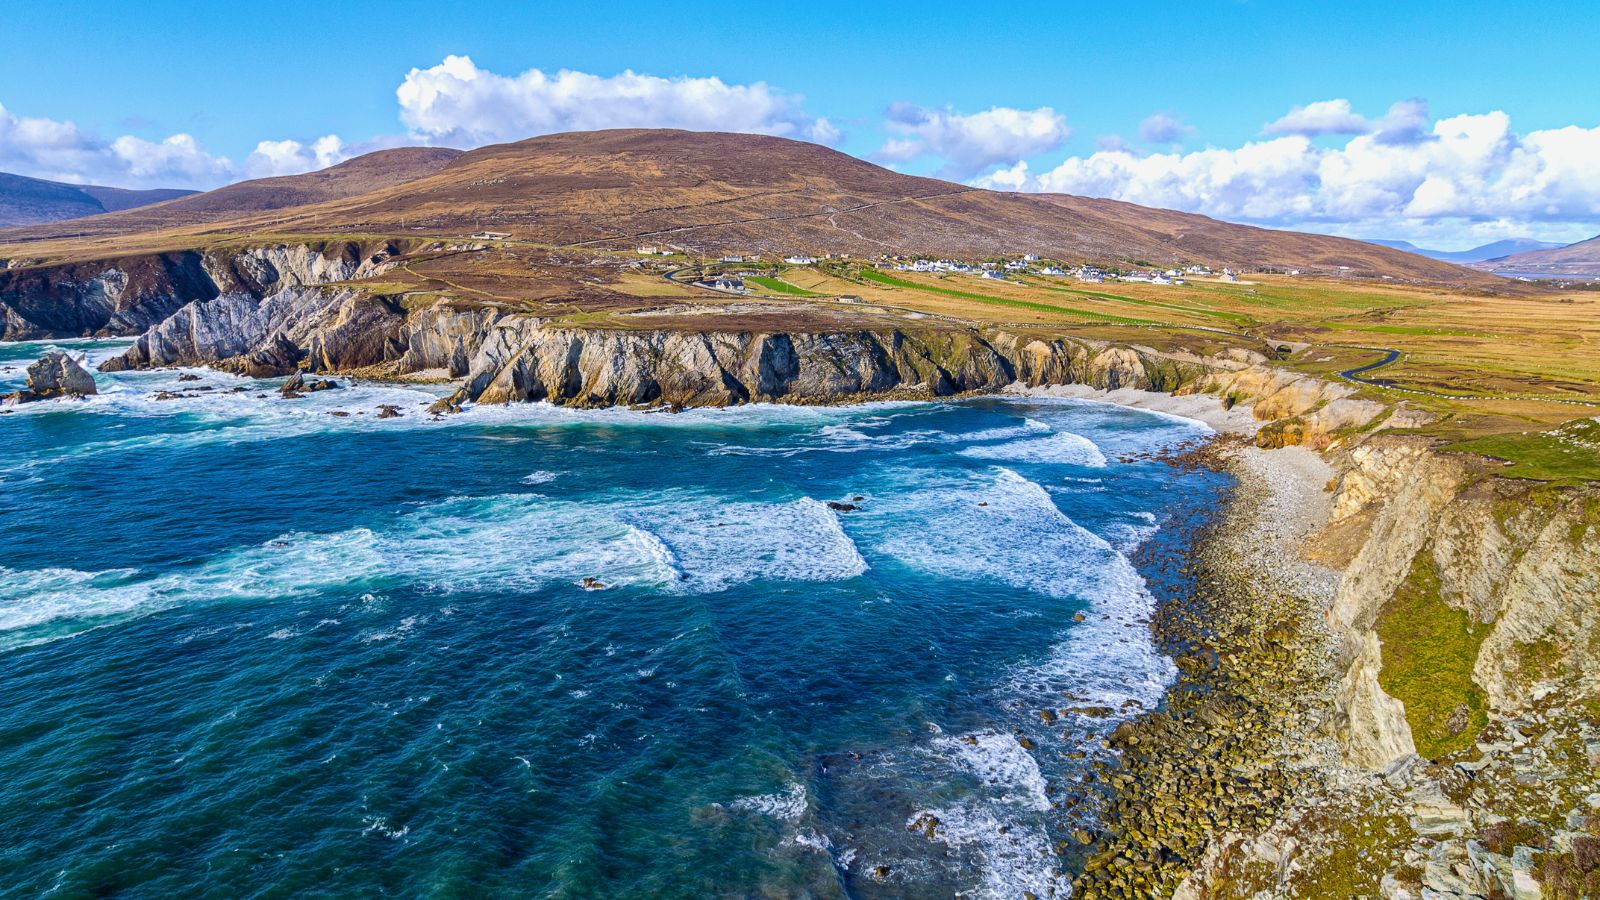 <p>If you love nature, cozy pubs, and old-school charm, Achill Island won’t let you down. I’ll talk more about the Wild Atlantic Way later, but Achill Island’s a fantastic stop along it. After crossing the bridge from the mainland, you’ll have access to enchanting and untouched natural landscapes.</p><p>Outdoor enthusiasts will be in their element. Expect beach walks, surfing, coastal hikes…you name it. I can’t recommend Achill Island enough as one of the best things to do in Ireland.</p>